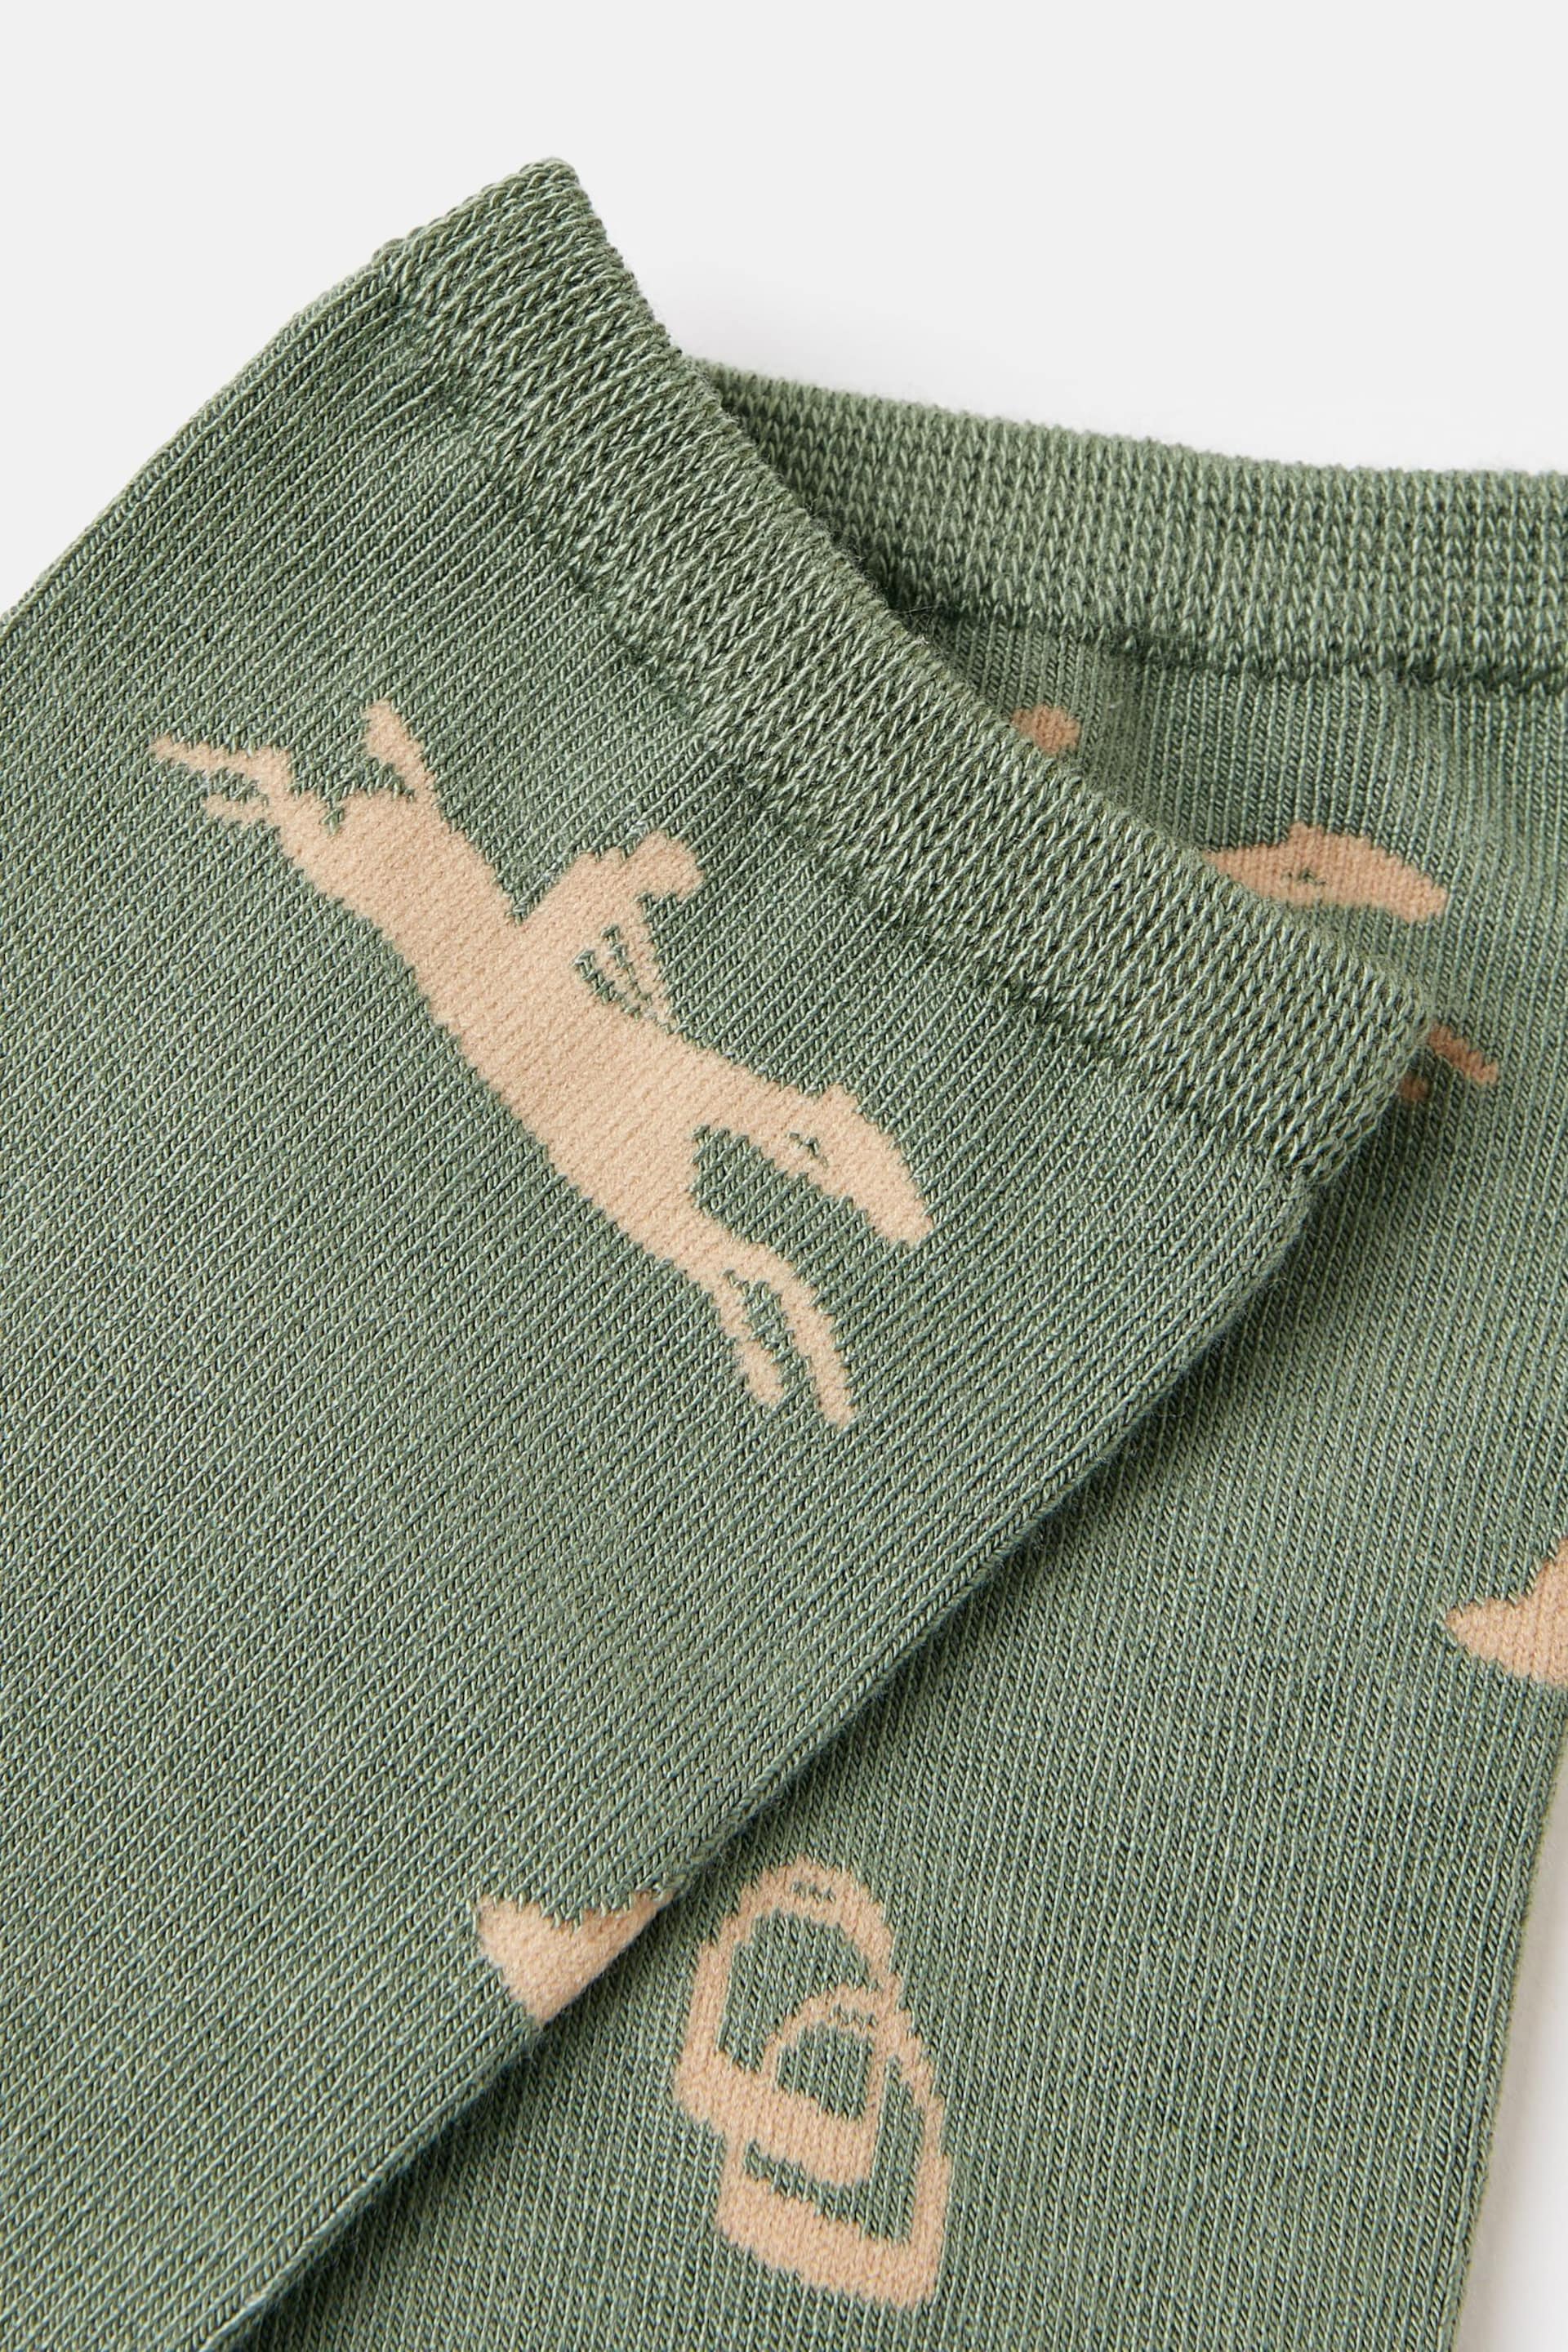 Joules Excellent Everyday Green Equestrian Ankle Socks - Image 3 of 3